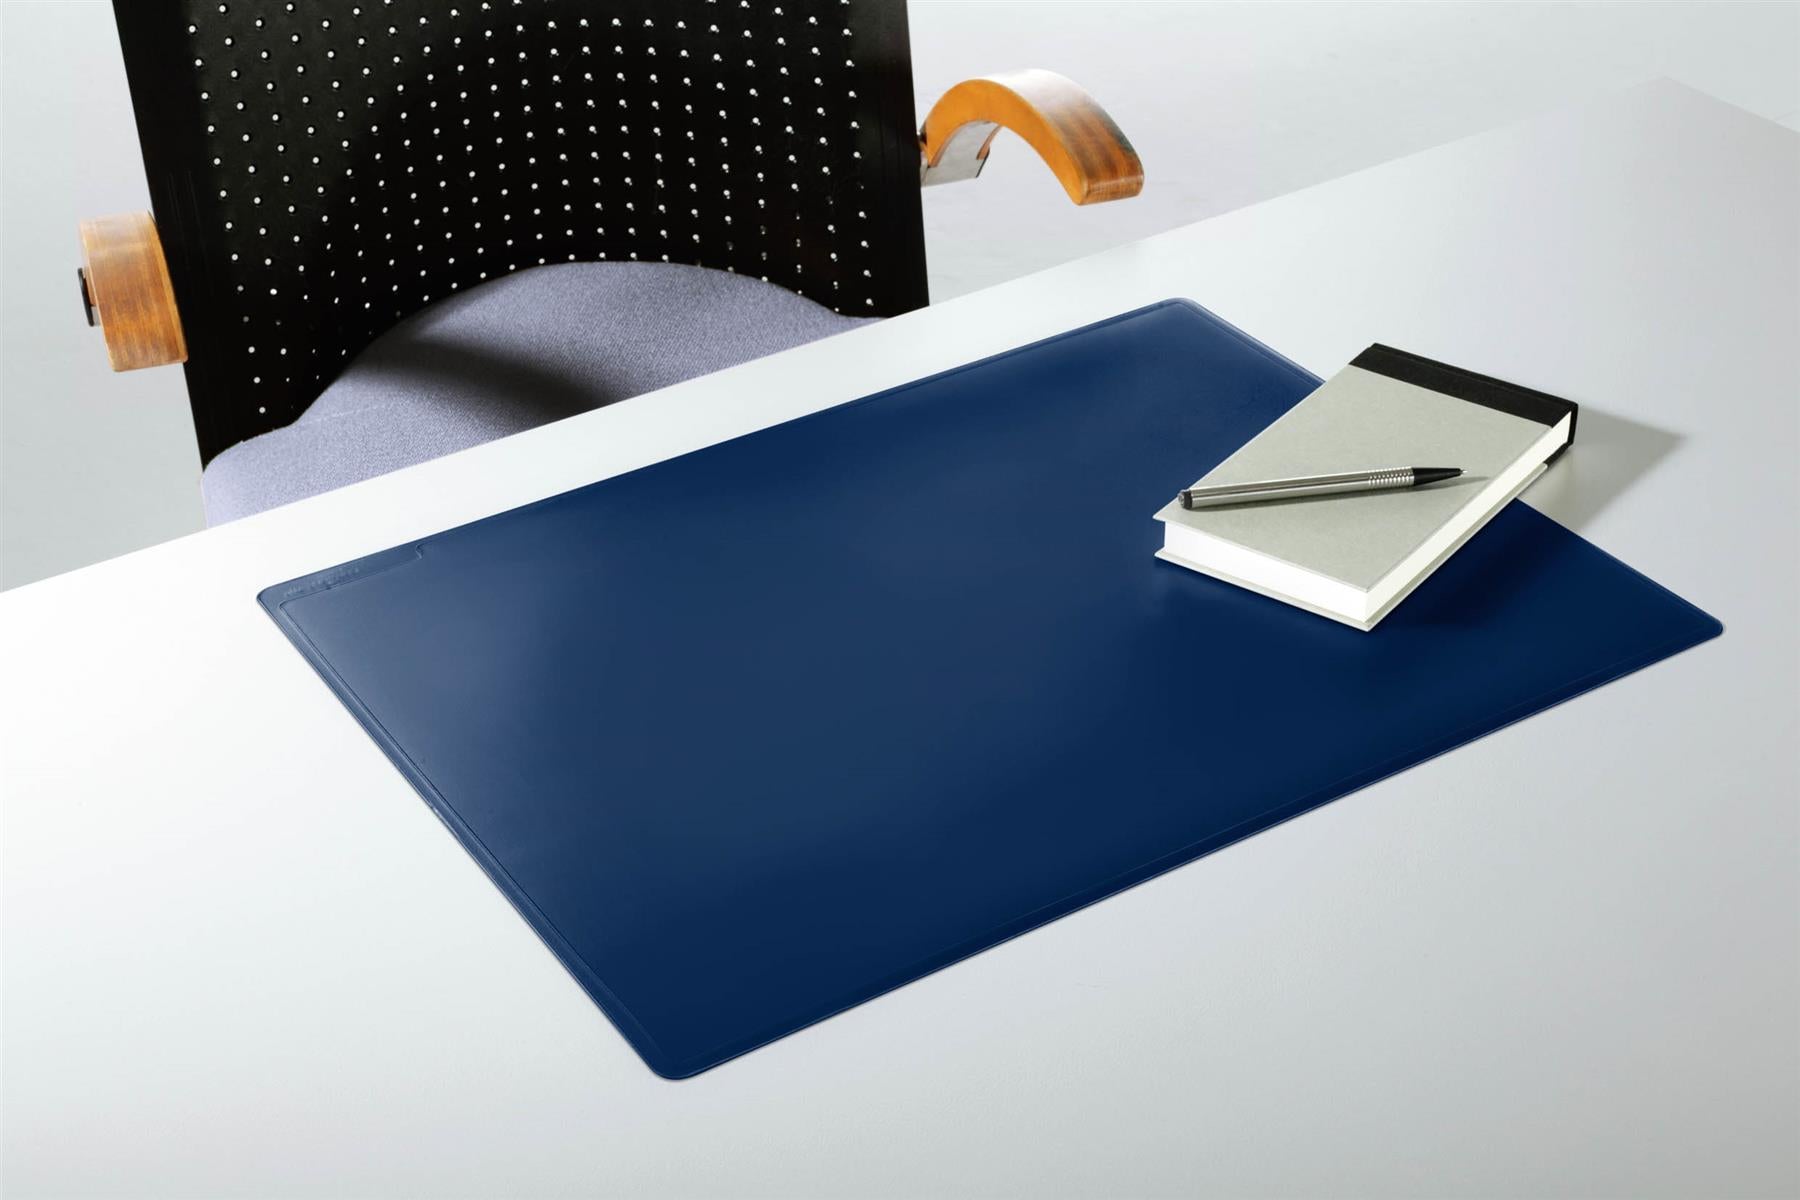 Durable Smooth Non-Slip Desk Mat Laptop PC Keyboard Mouse Pad | 53x40 cm | Blue